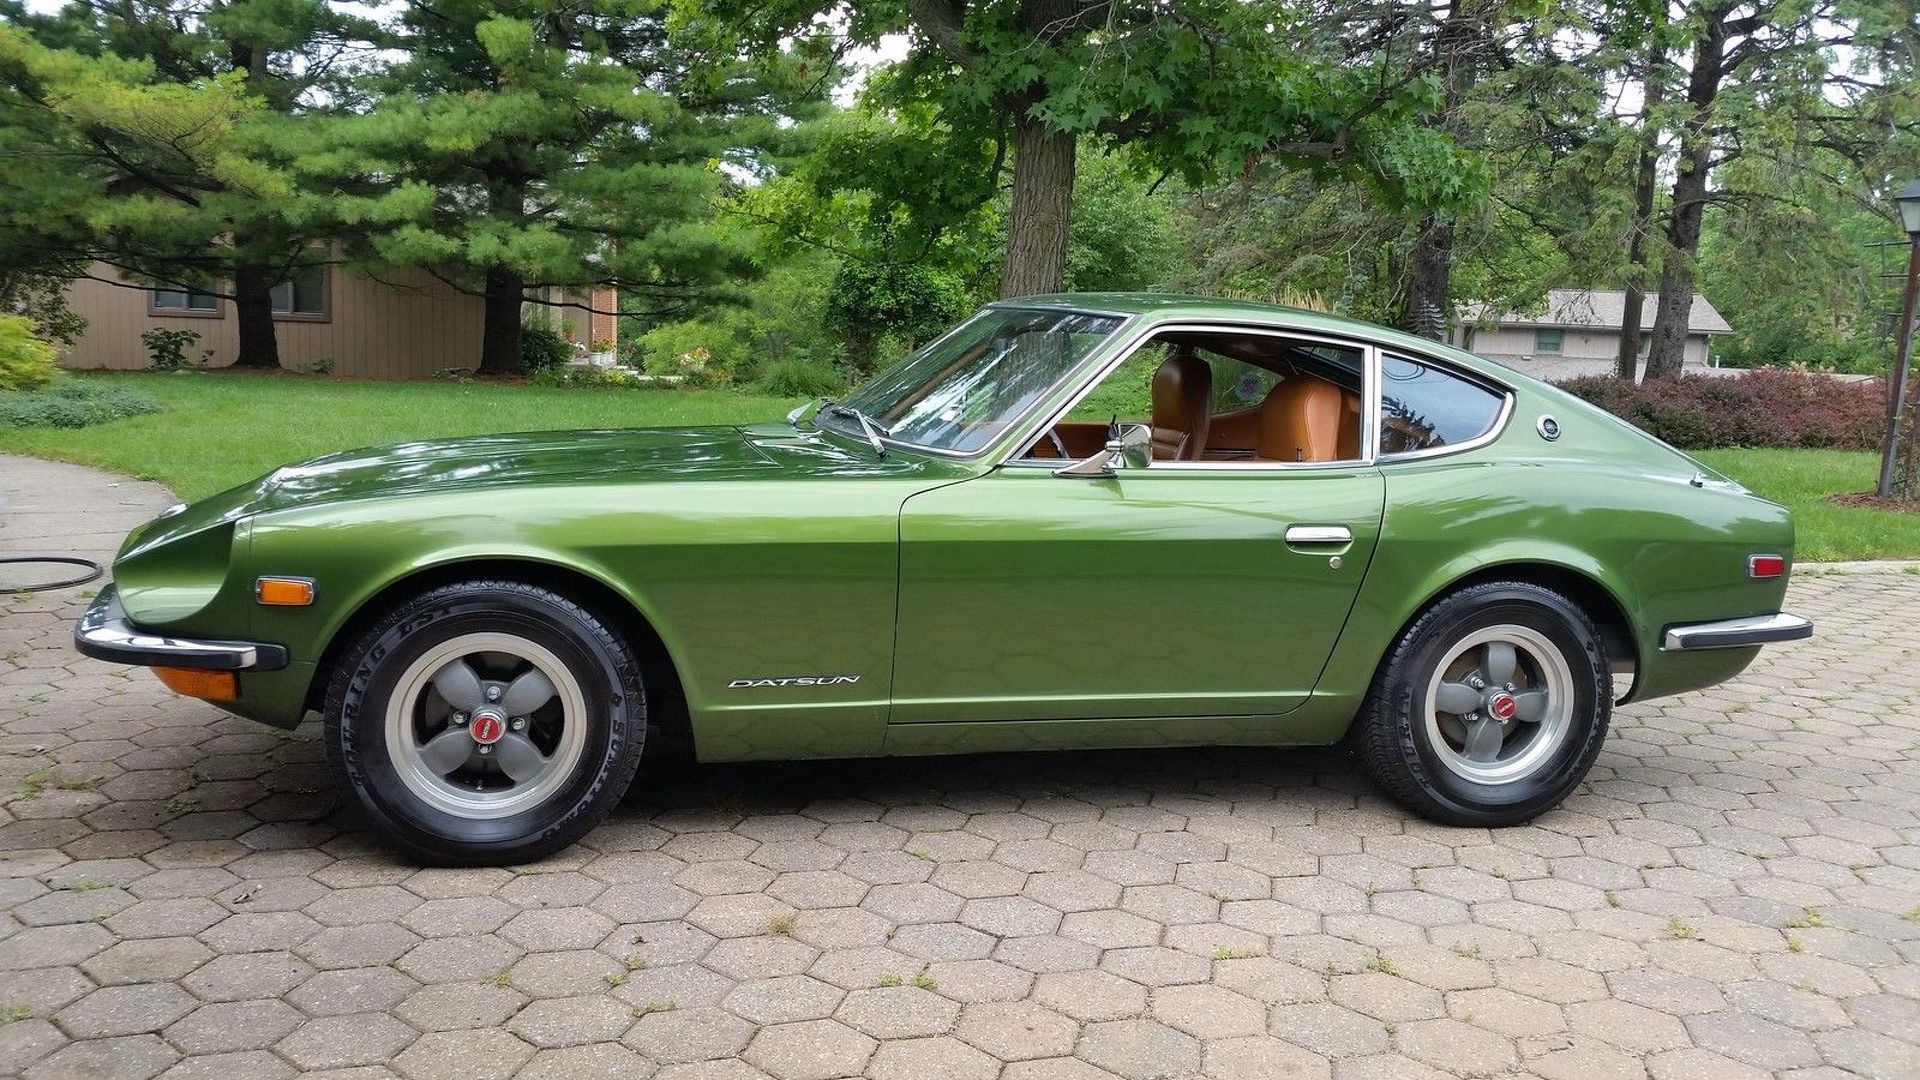 For Sale: Immaculate 1973 Datsun 240Z in the USA